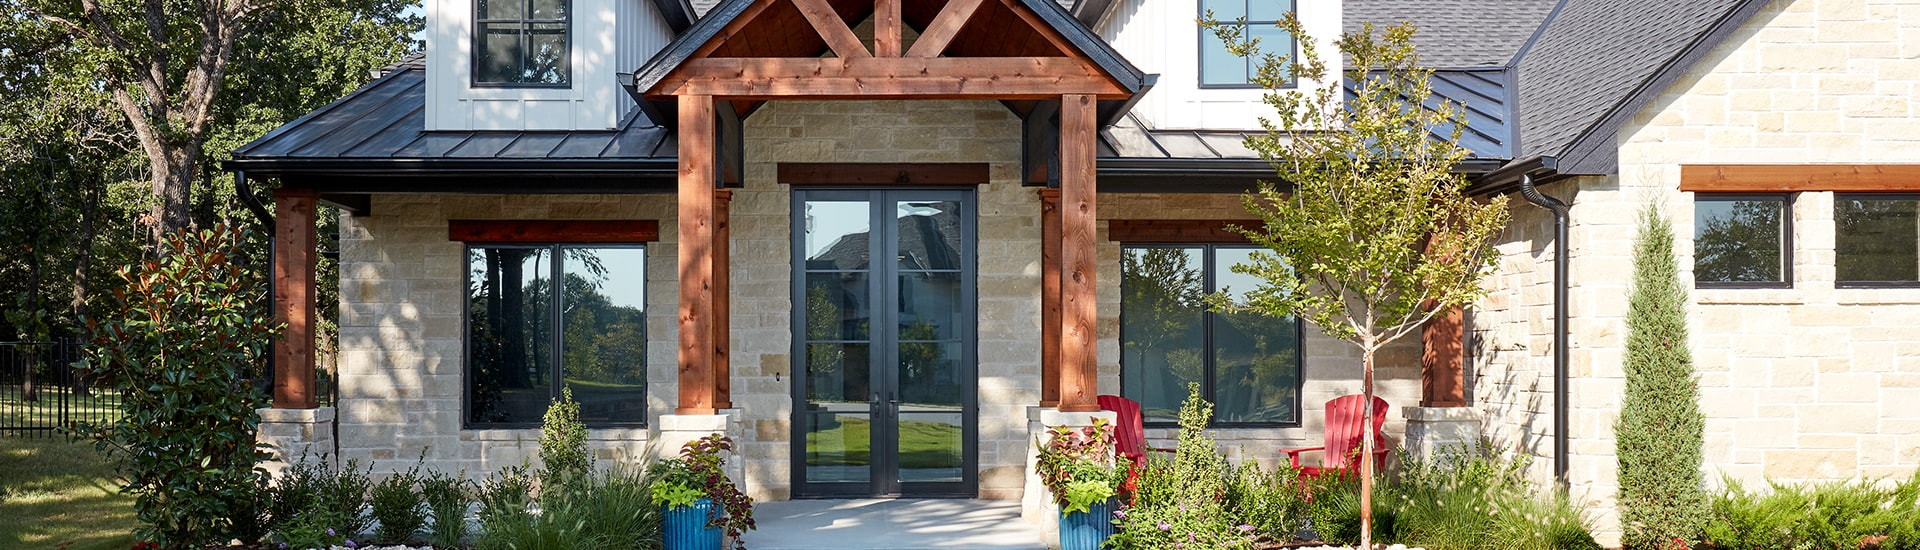 a brick home exterior with a wood-framed entryway showcase two full light wood entry doors with a rich black color